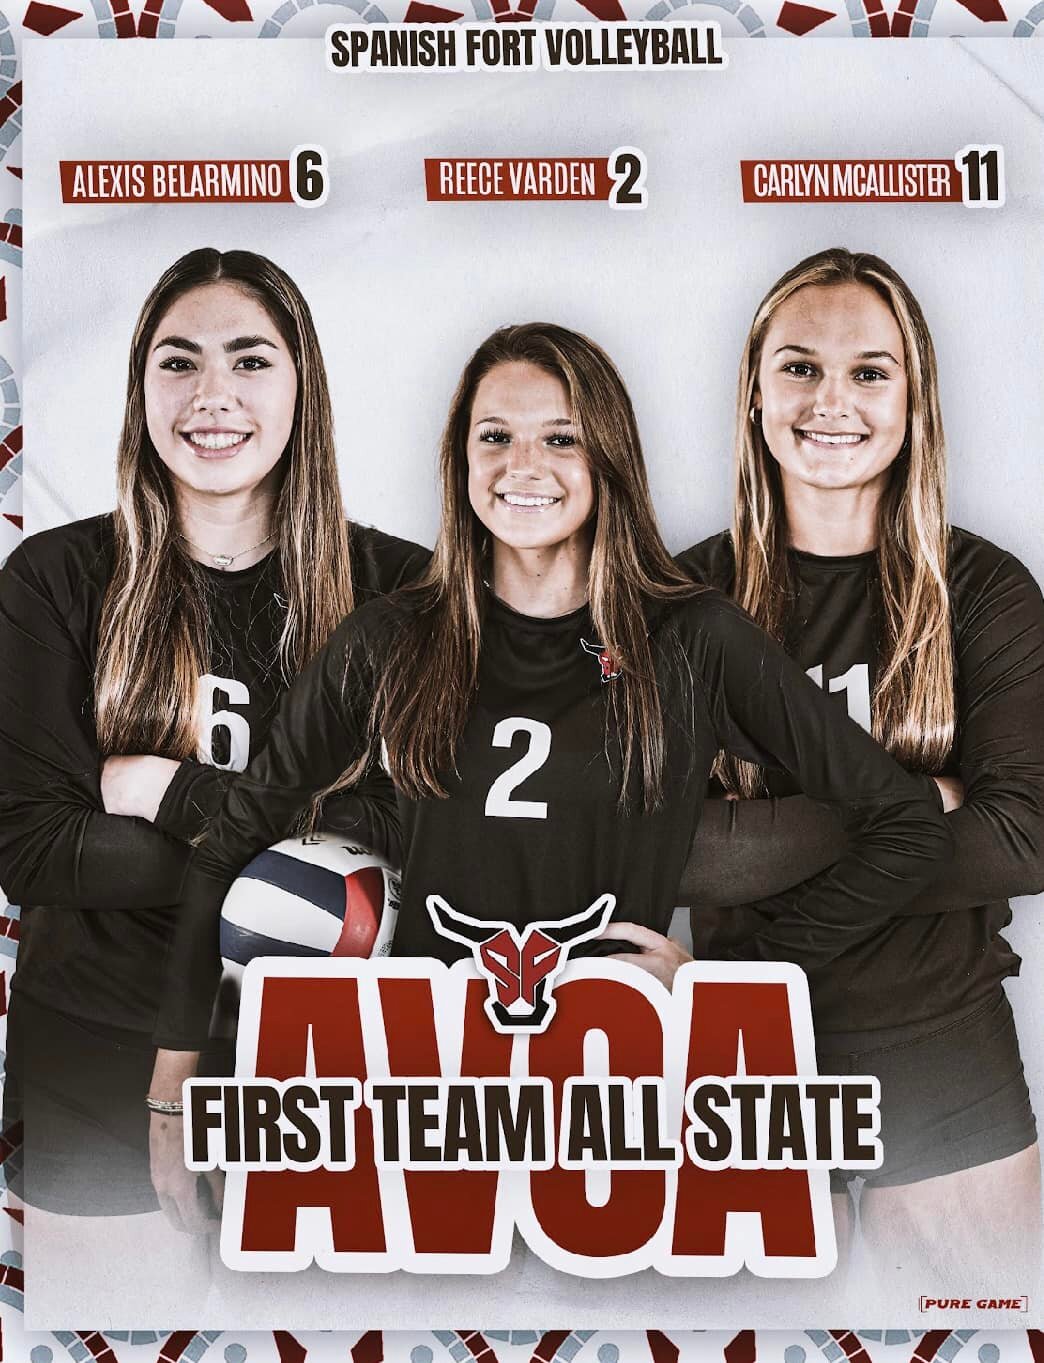 The Spanish Fort Toros landed three athletes on the Alabama High School Volleyball Coaches Association’s Class 6A first-team all-state. Alexis Belarmino, Reece Varden and Carlyn McCallister closed their Spanish Fort volleyball careers with the recognition.